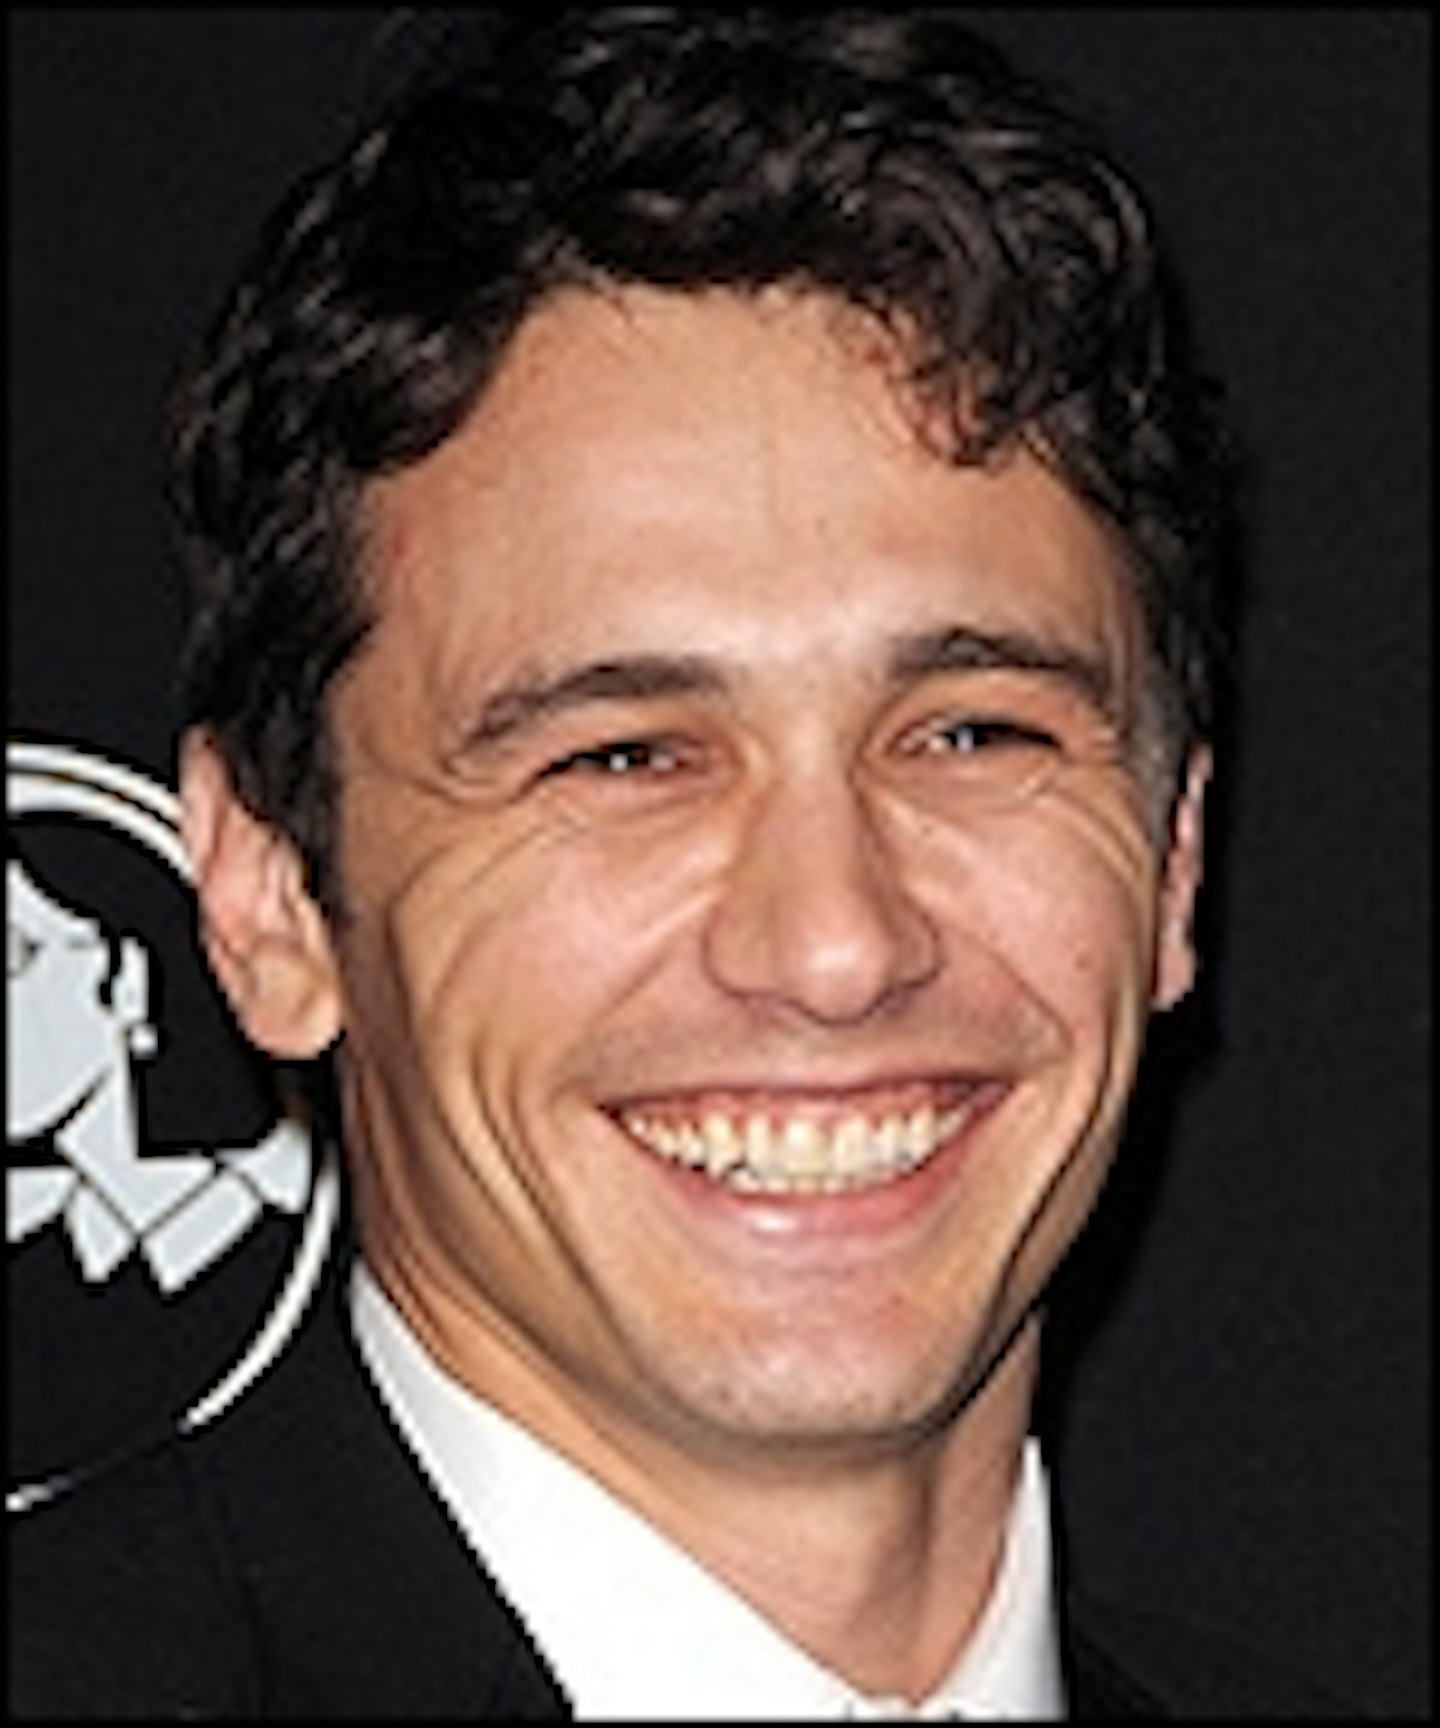 James Franco In Talks For Why Him?